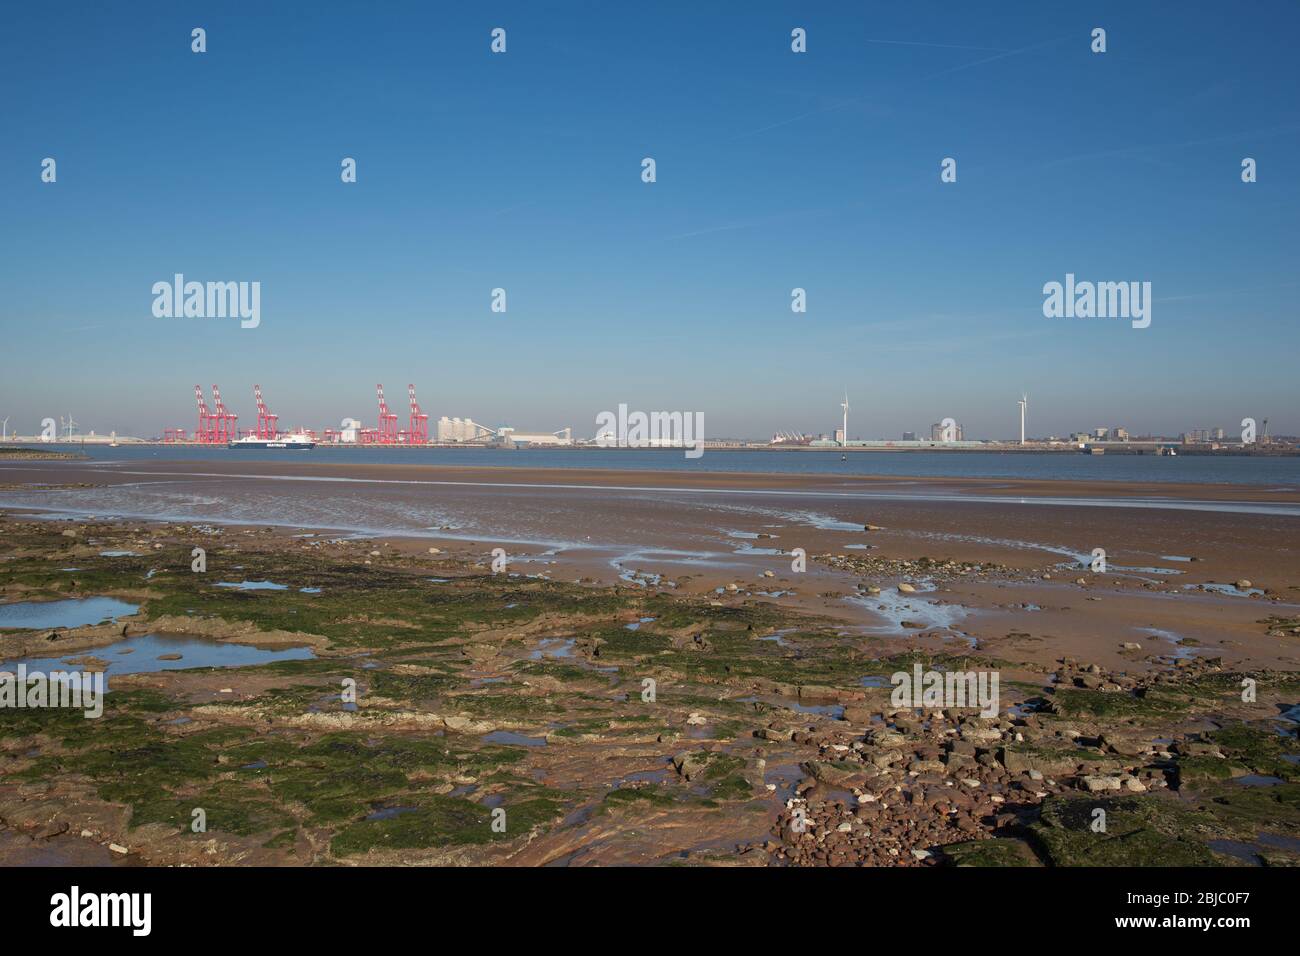 Town of Wallasey, England. New Brighton beach with the River Mersey, and the red cranes at Seaforth Container Terminal, in the Background. Stock Photo